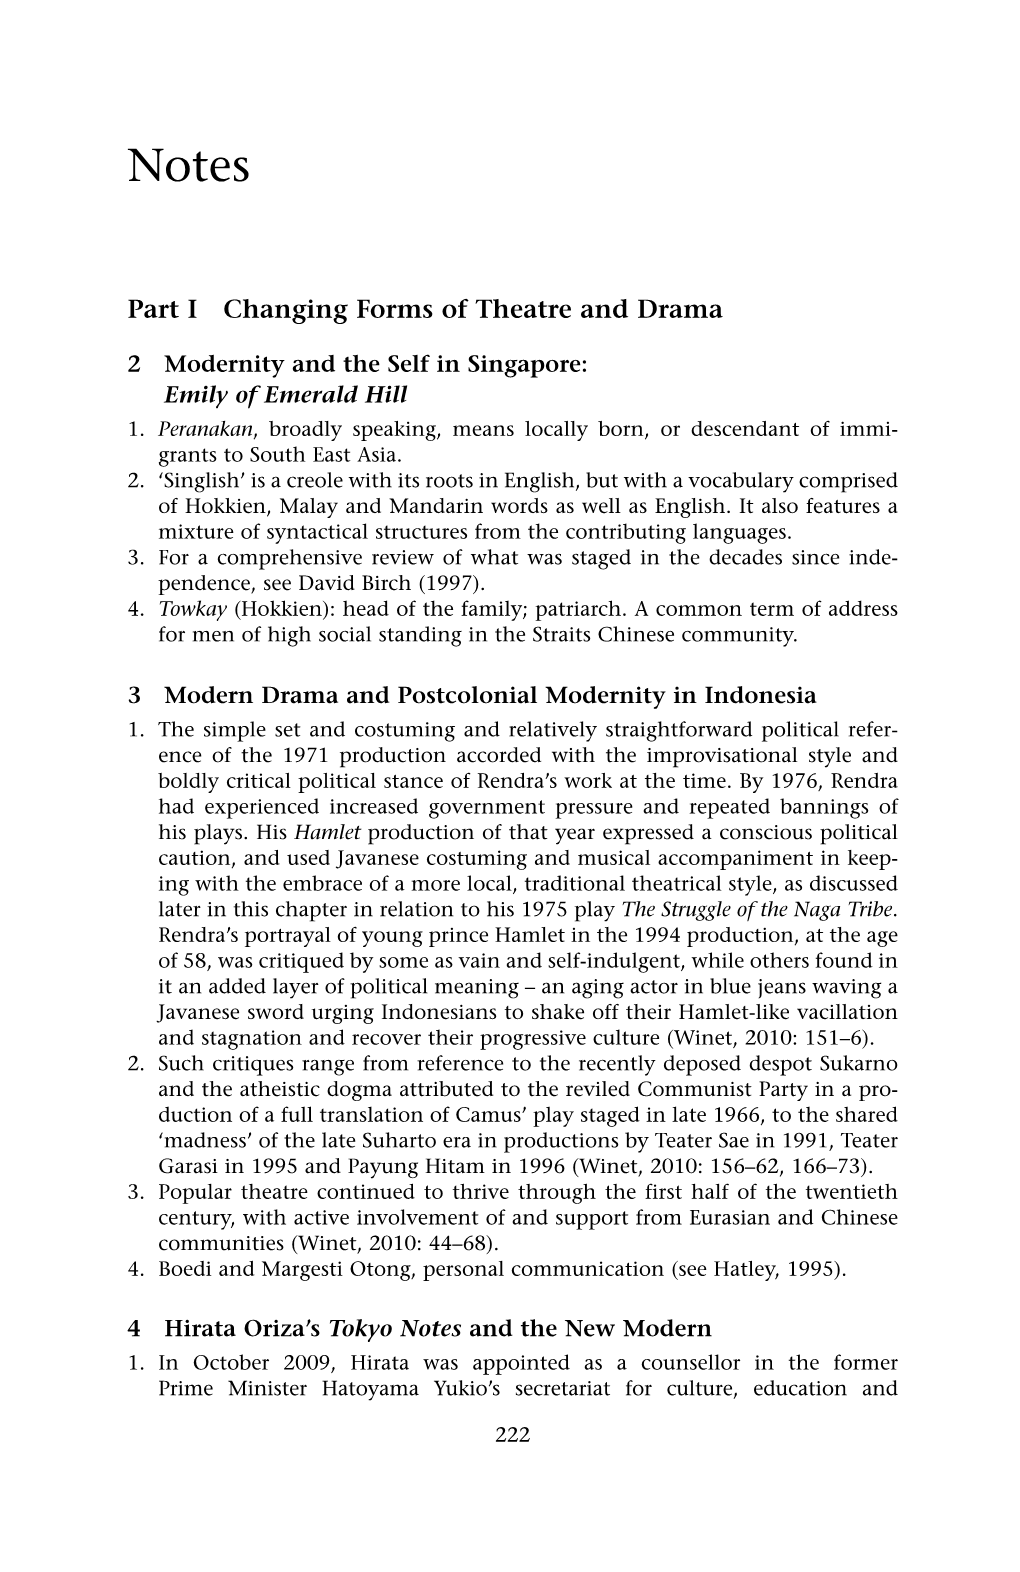 Part I Changing Forms of Theatre and Drama